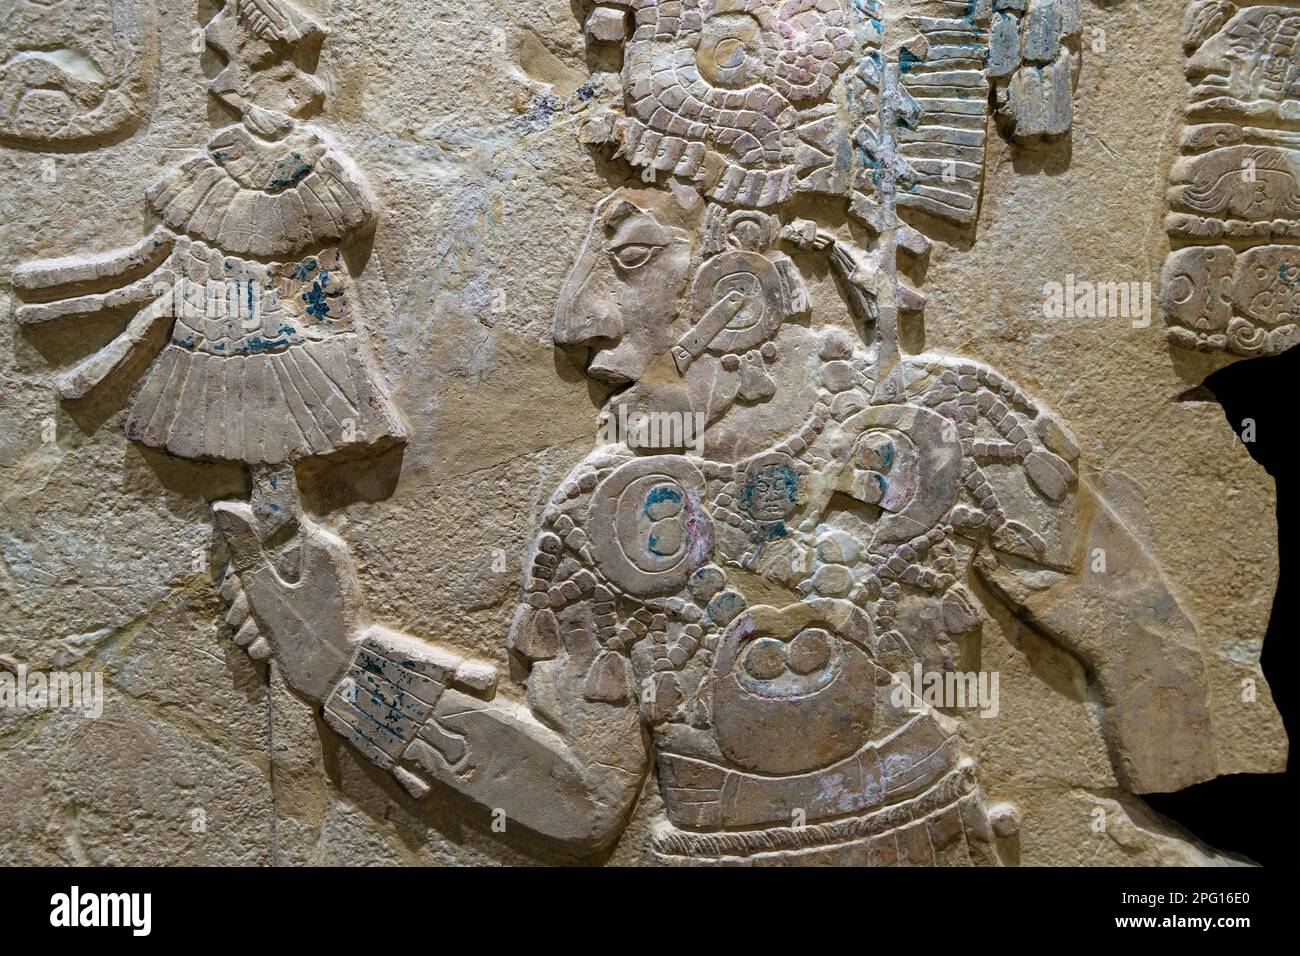 Maya bas relief carving in a stele tombstone of mayan ruler king, Palenque, Mexico. Stock Photo